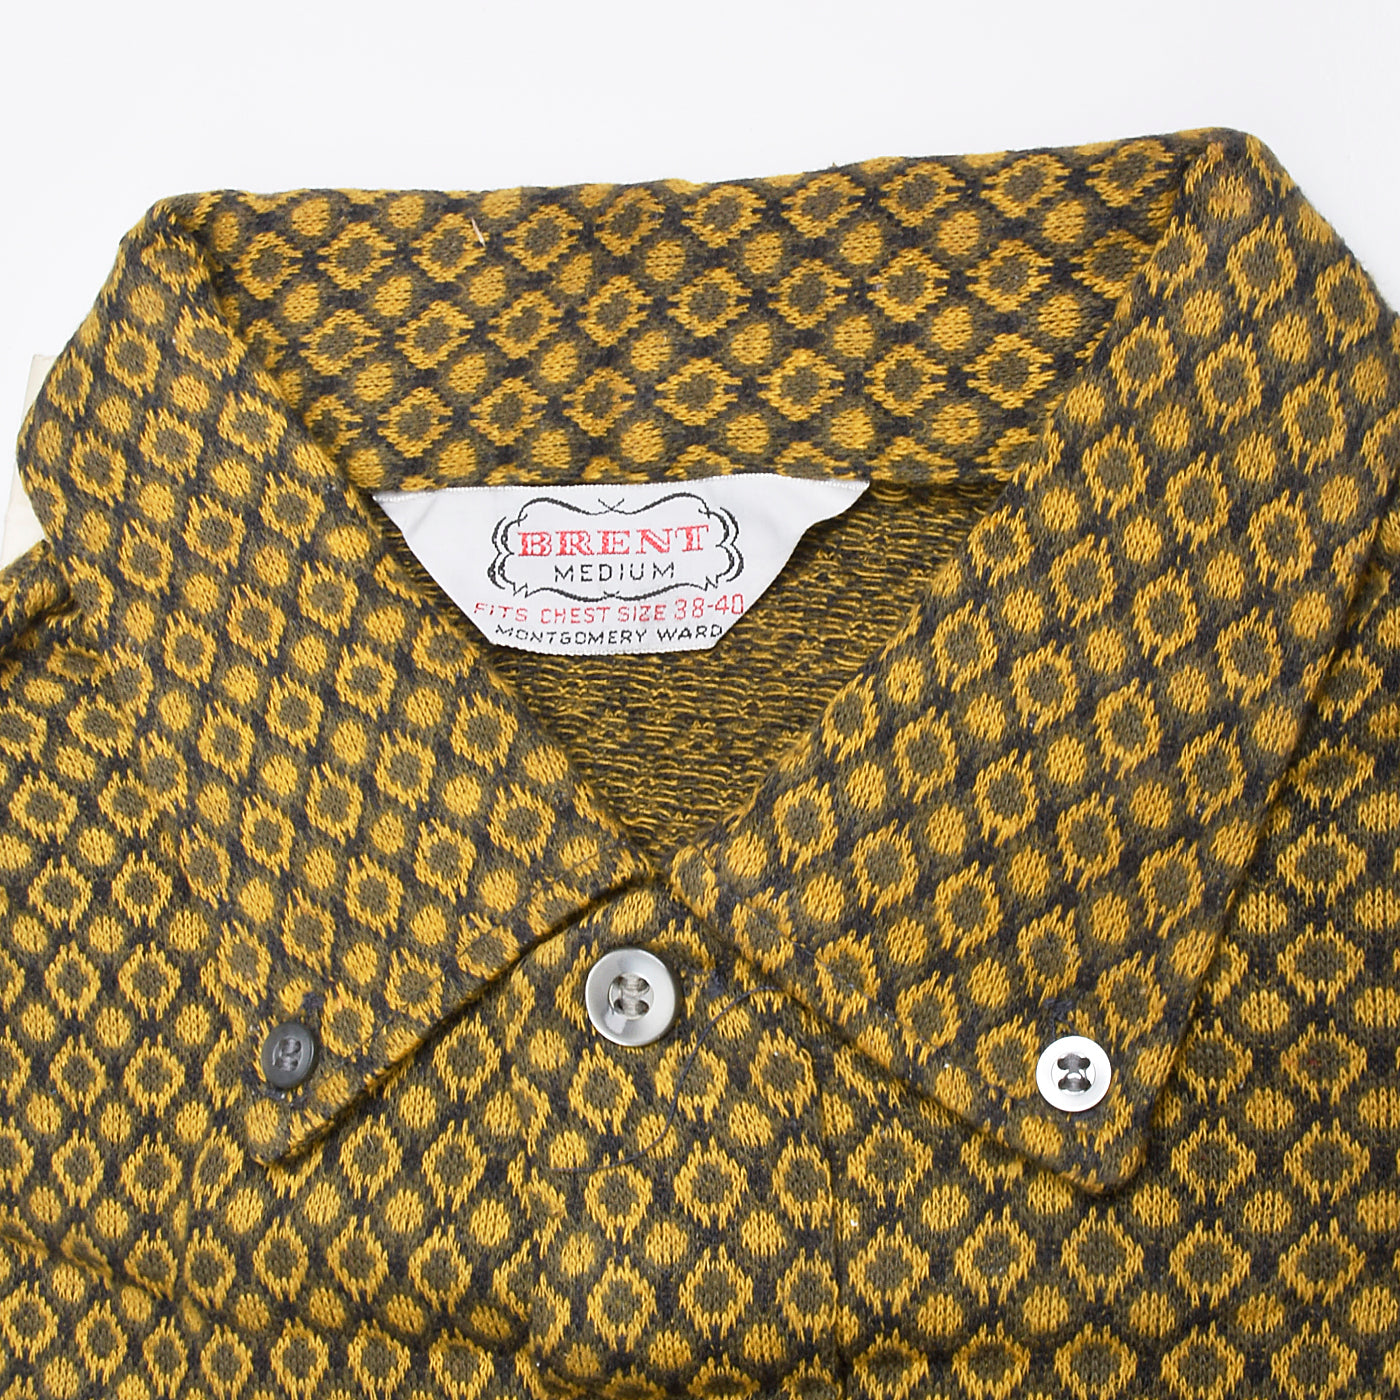 1950s Mens Deadstock Shirt in Gold and Gray Knit